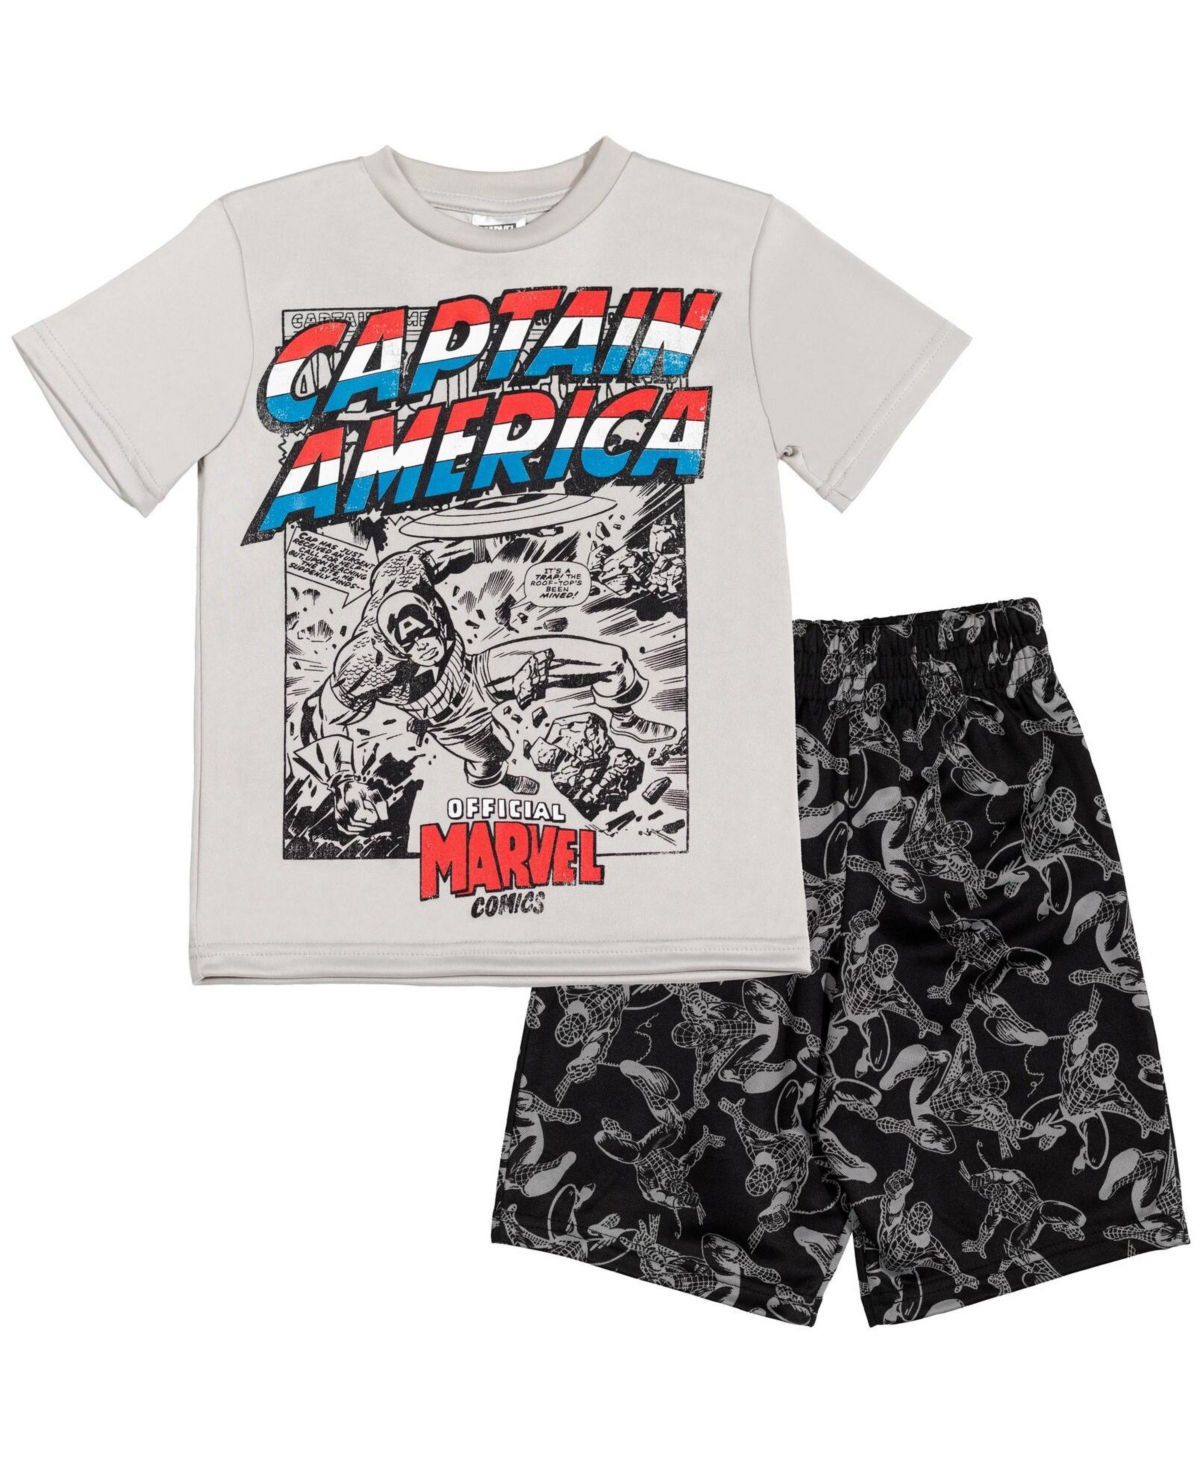 Marvel Babies' Avengers Captain America Graphic T-shirt And Shorts Outfit Set Toddler